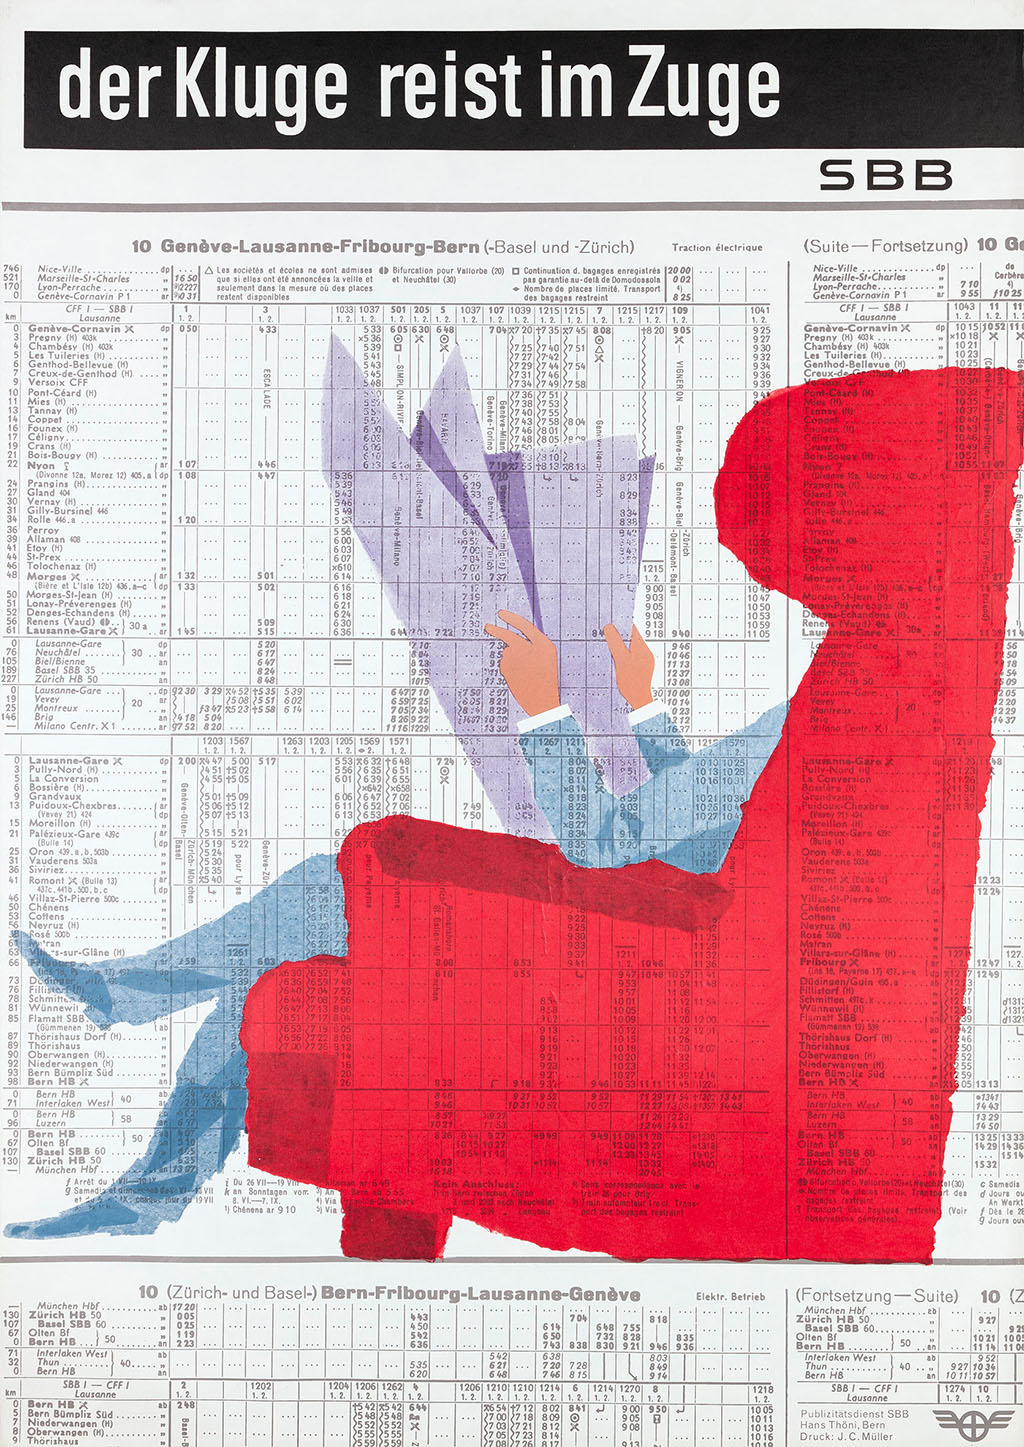 Poster of man sitting in a red chair with timetable of the SBB